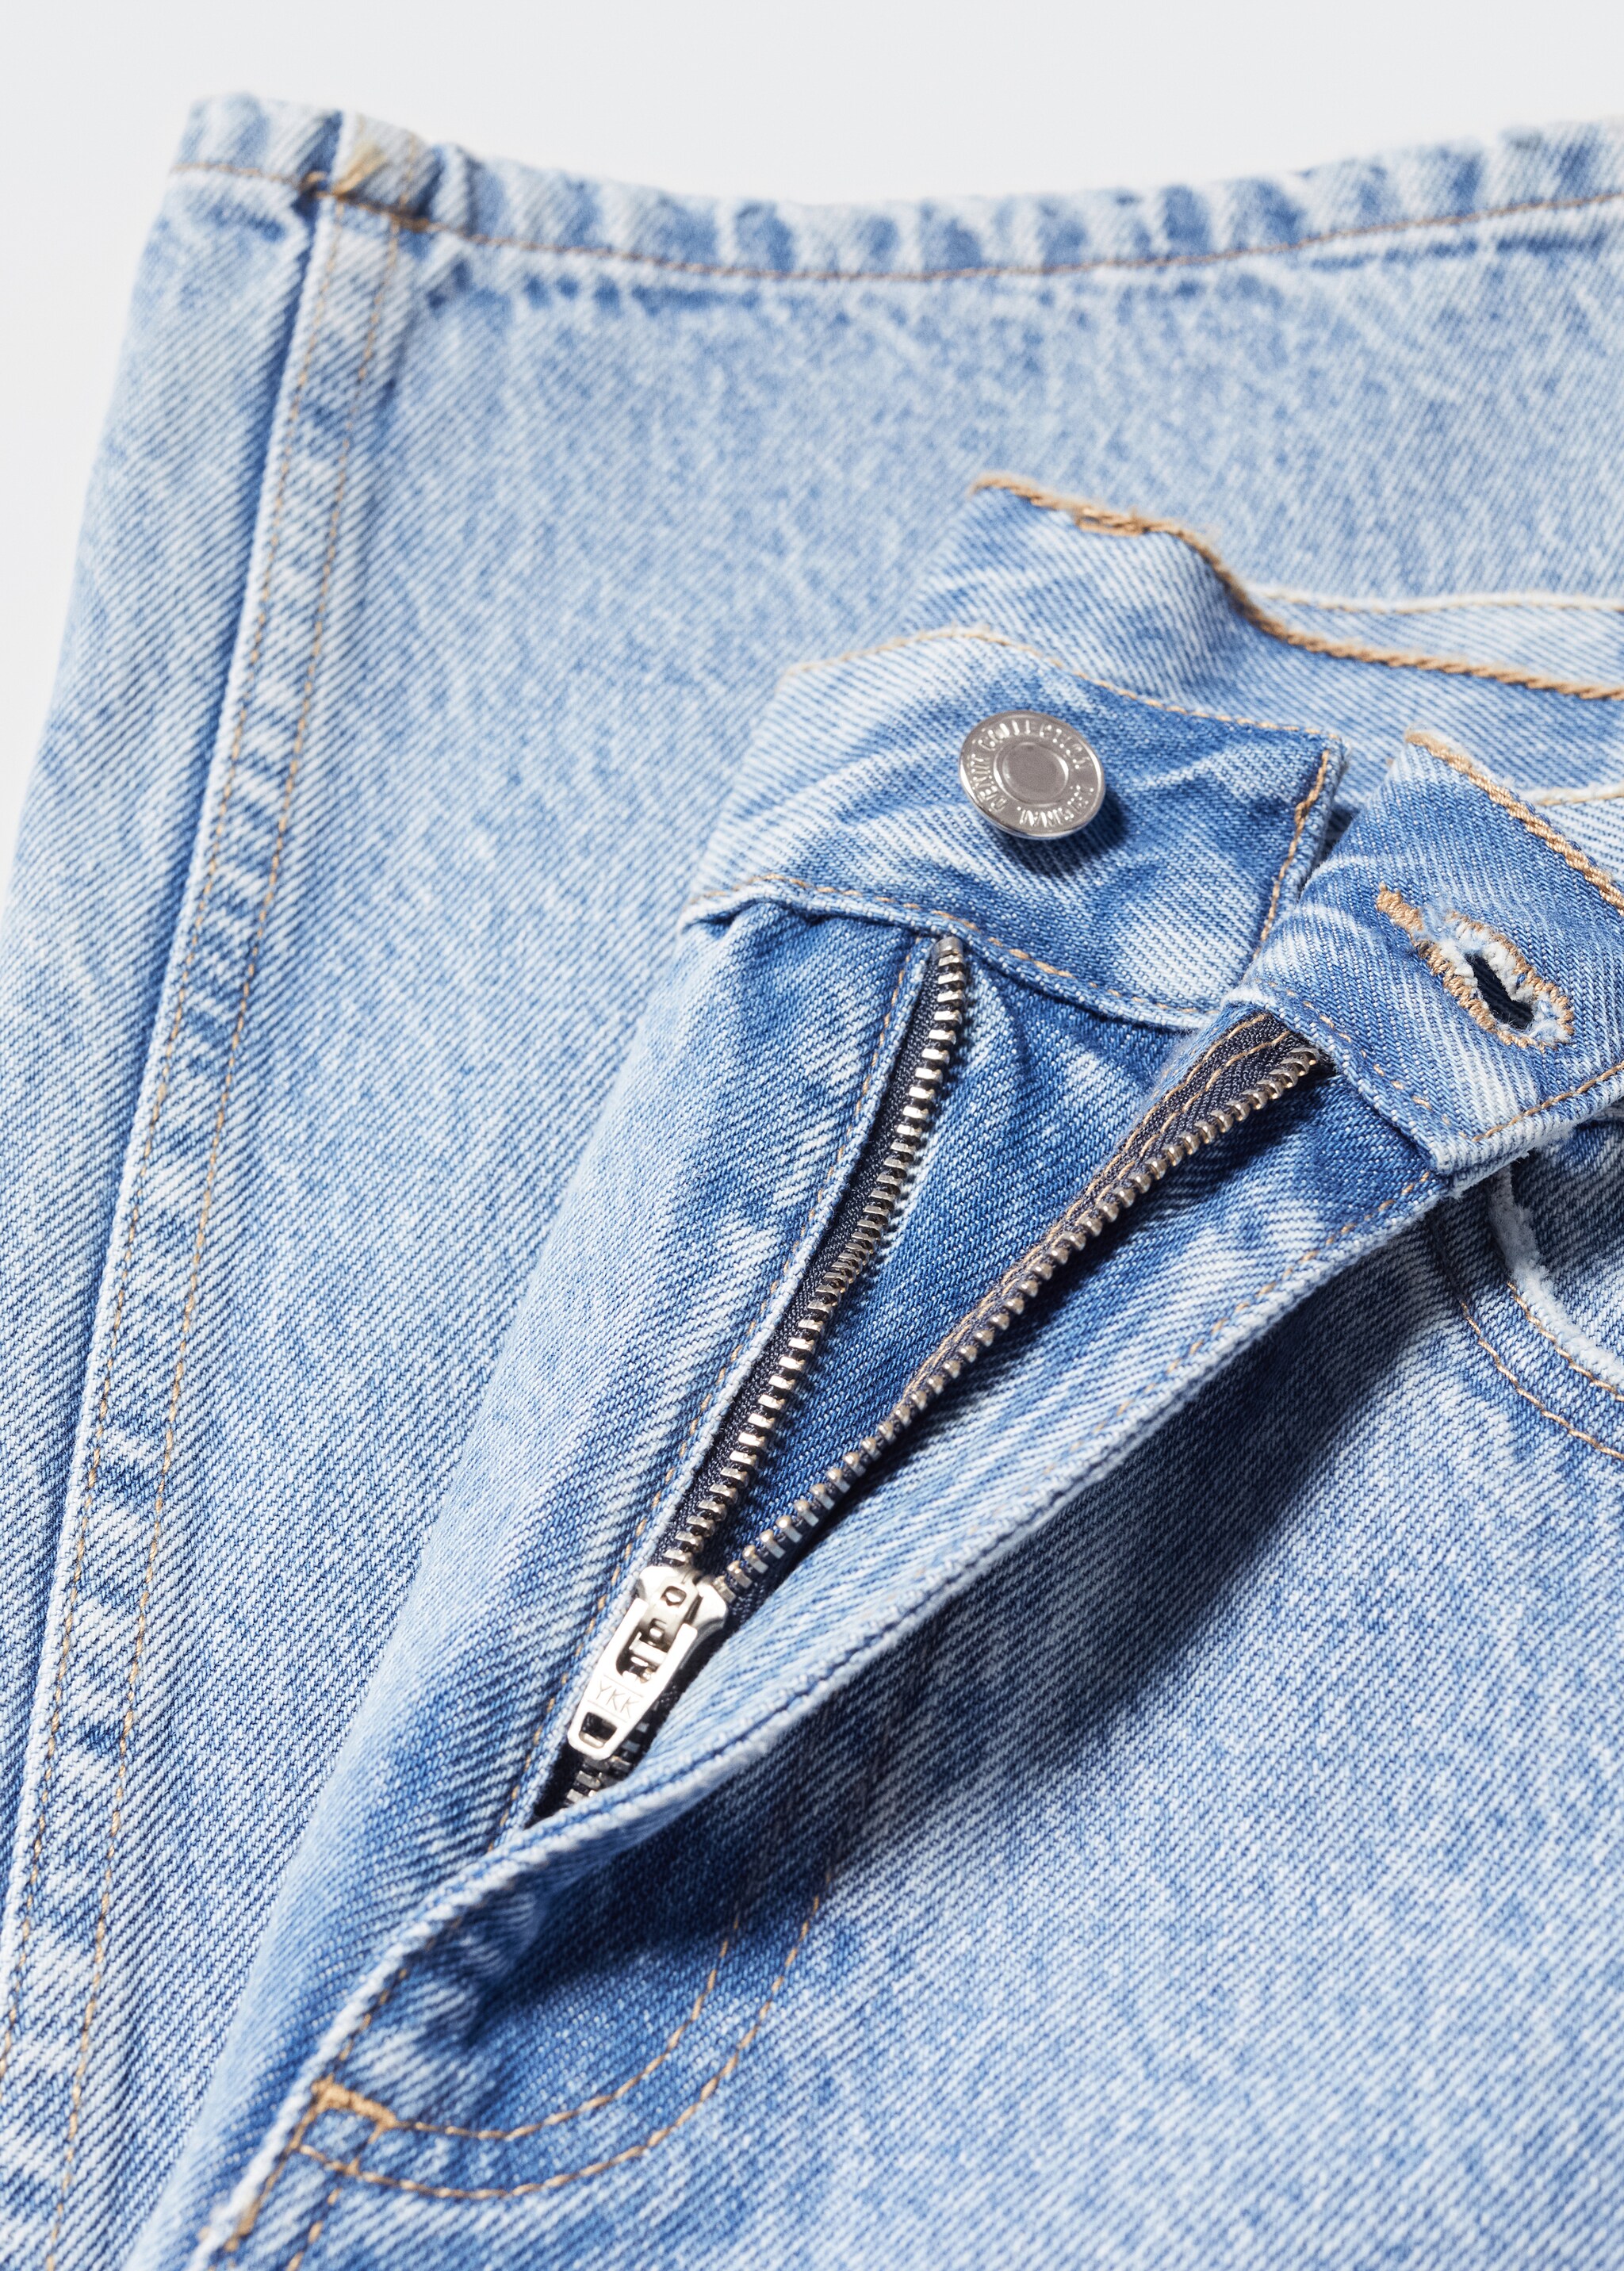 Ripped straight jeans - Details of the article 8